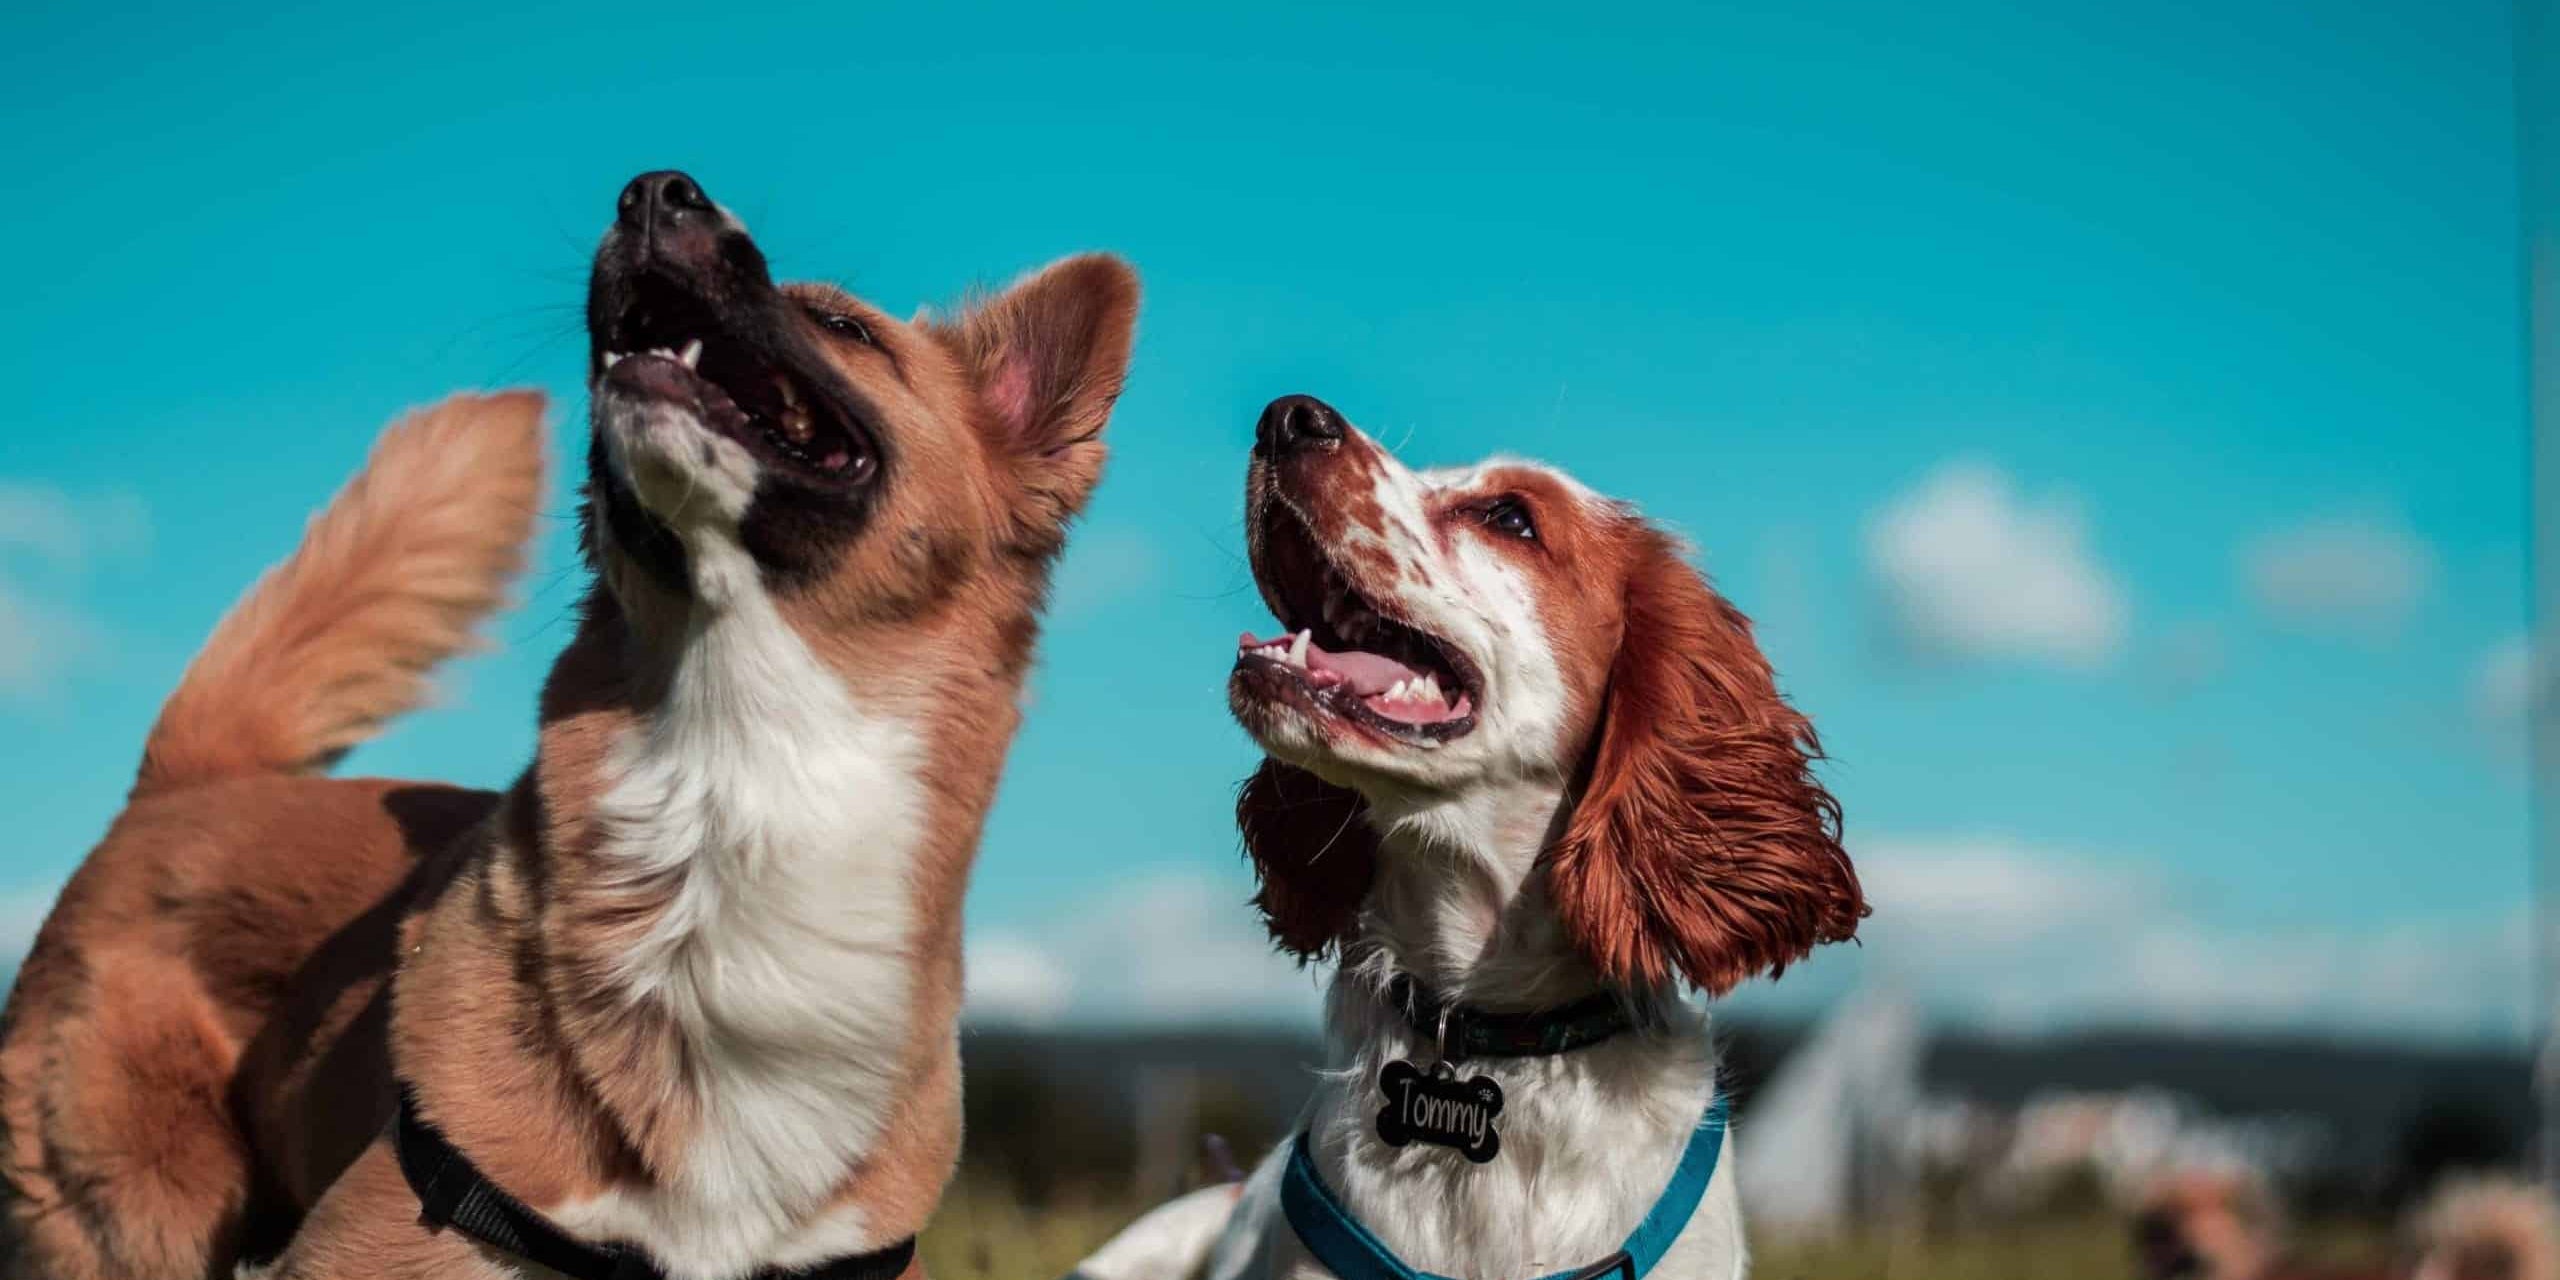 Is CBD Oil Safe for Dogs?